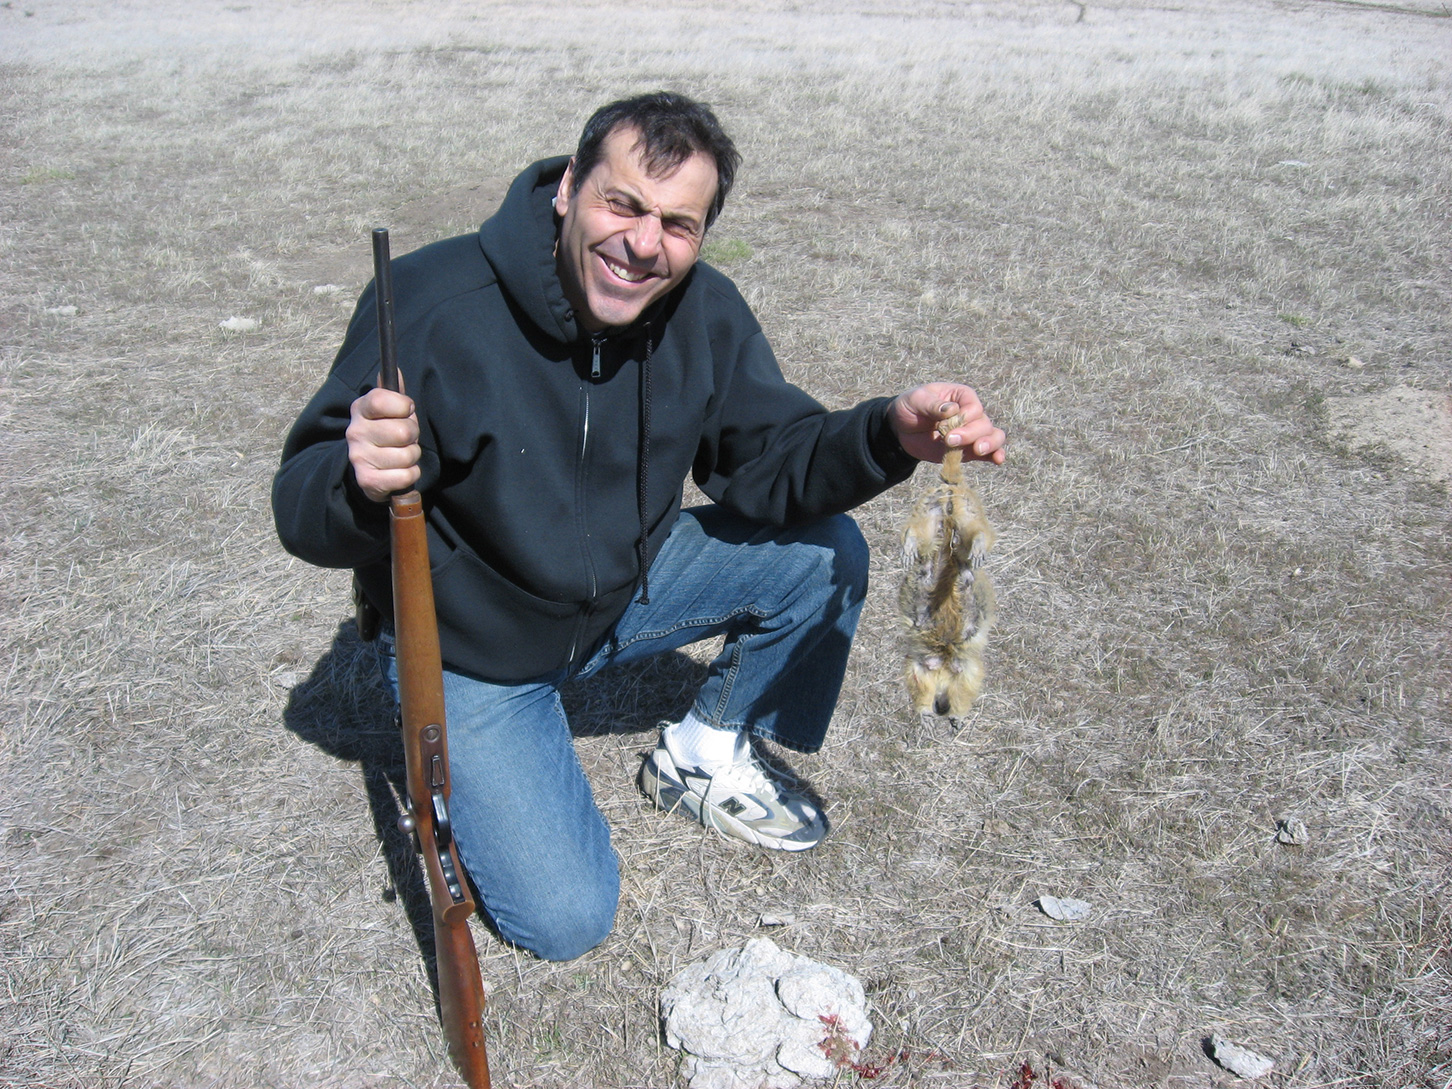 Man with a riggle holding a deat rodent